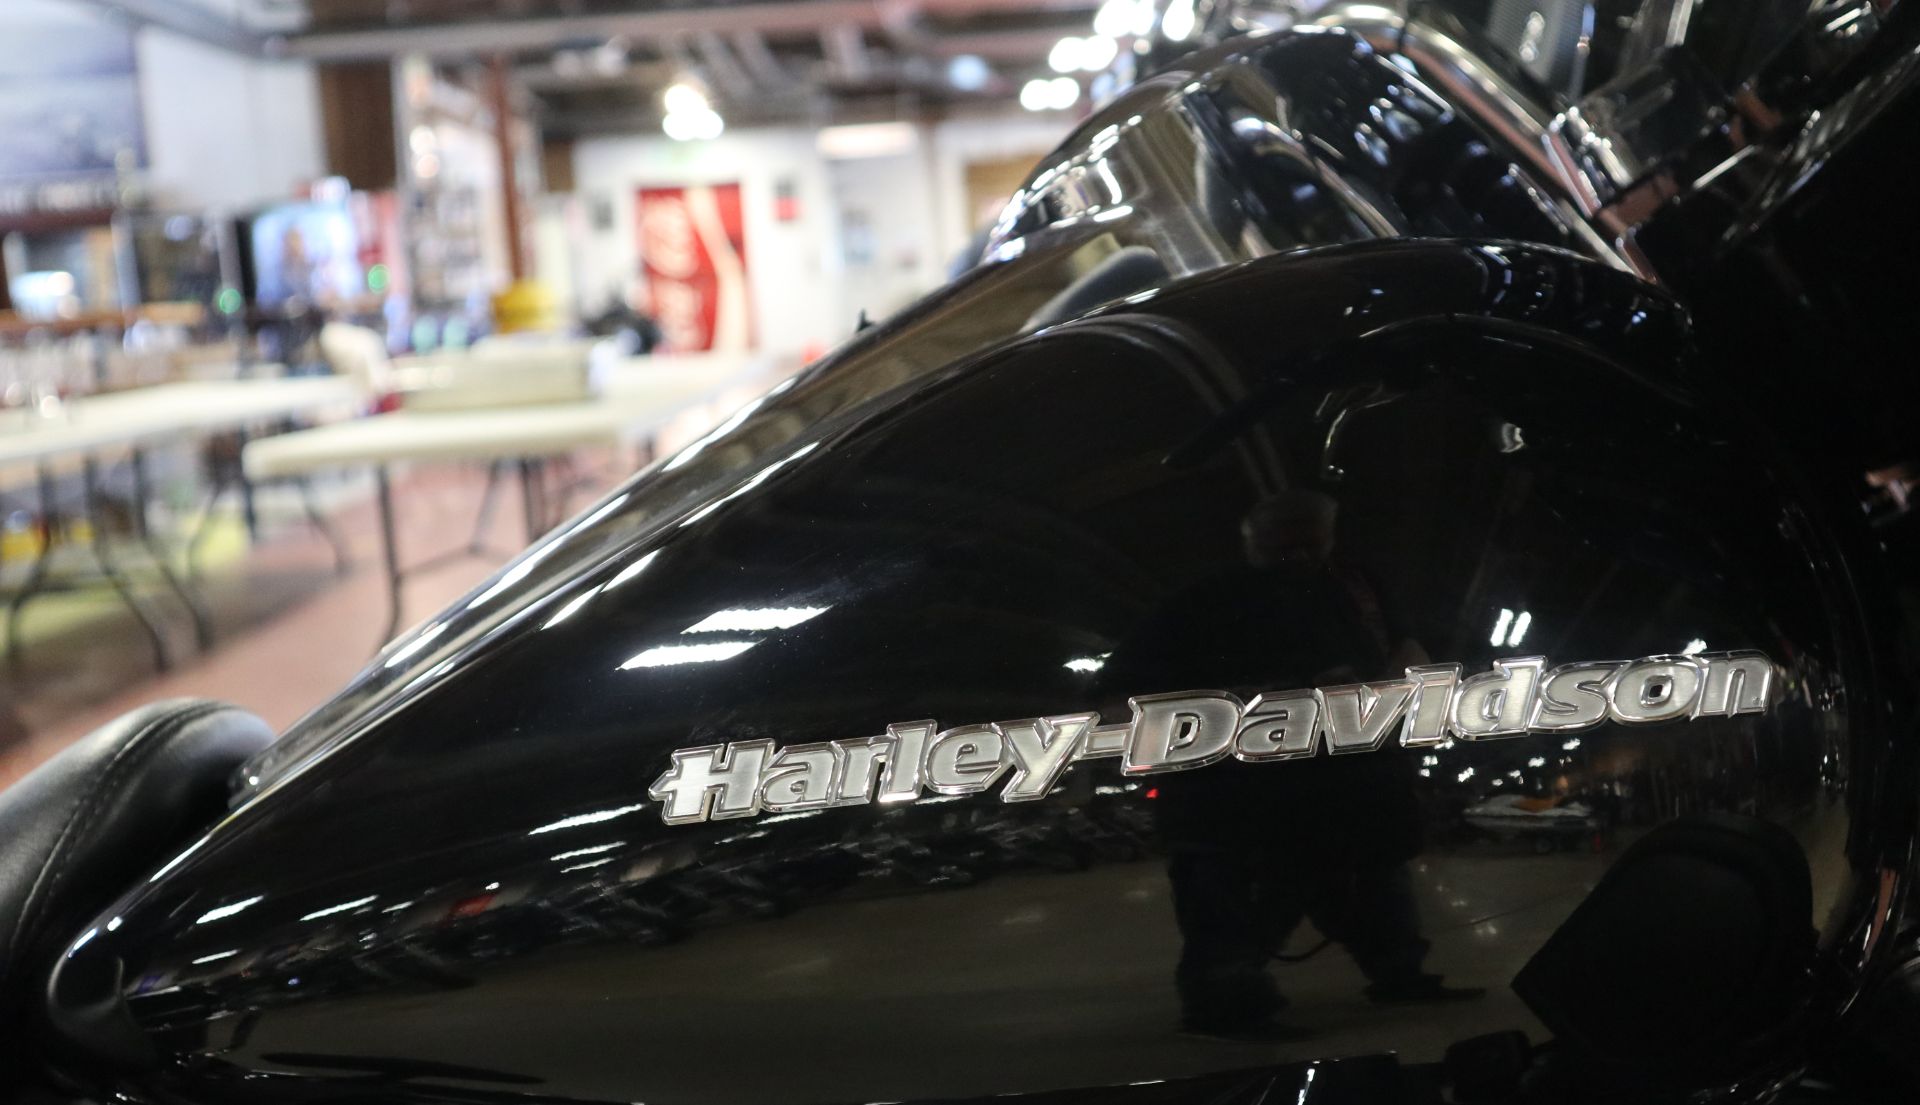 2021 Harley-Davidson Ultra Limited in New London, Connecticut - Photo 8